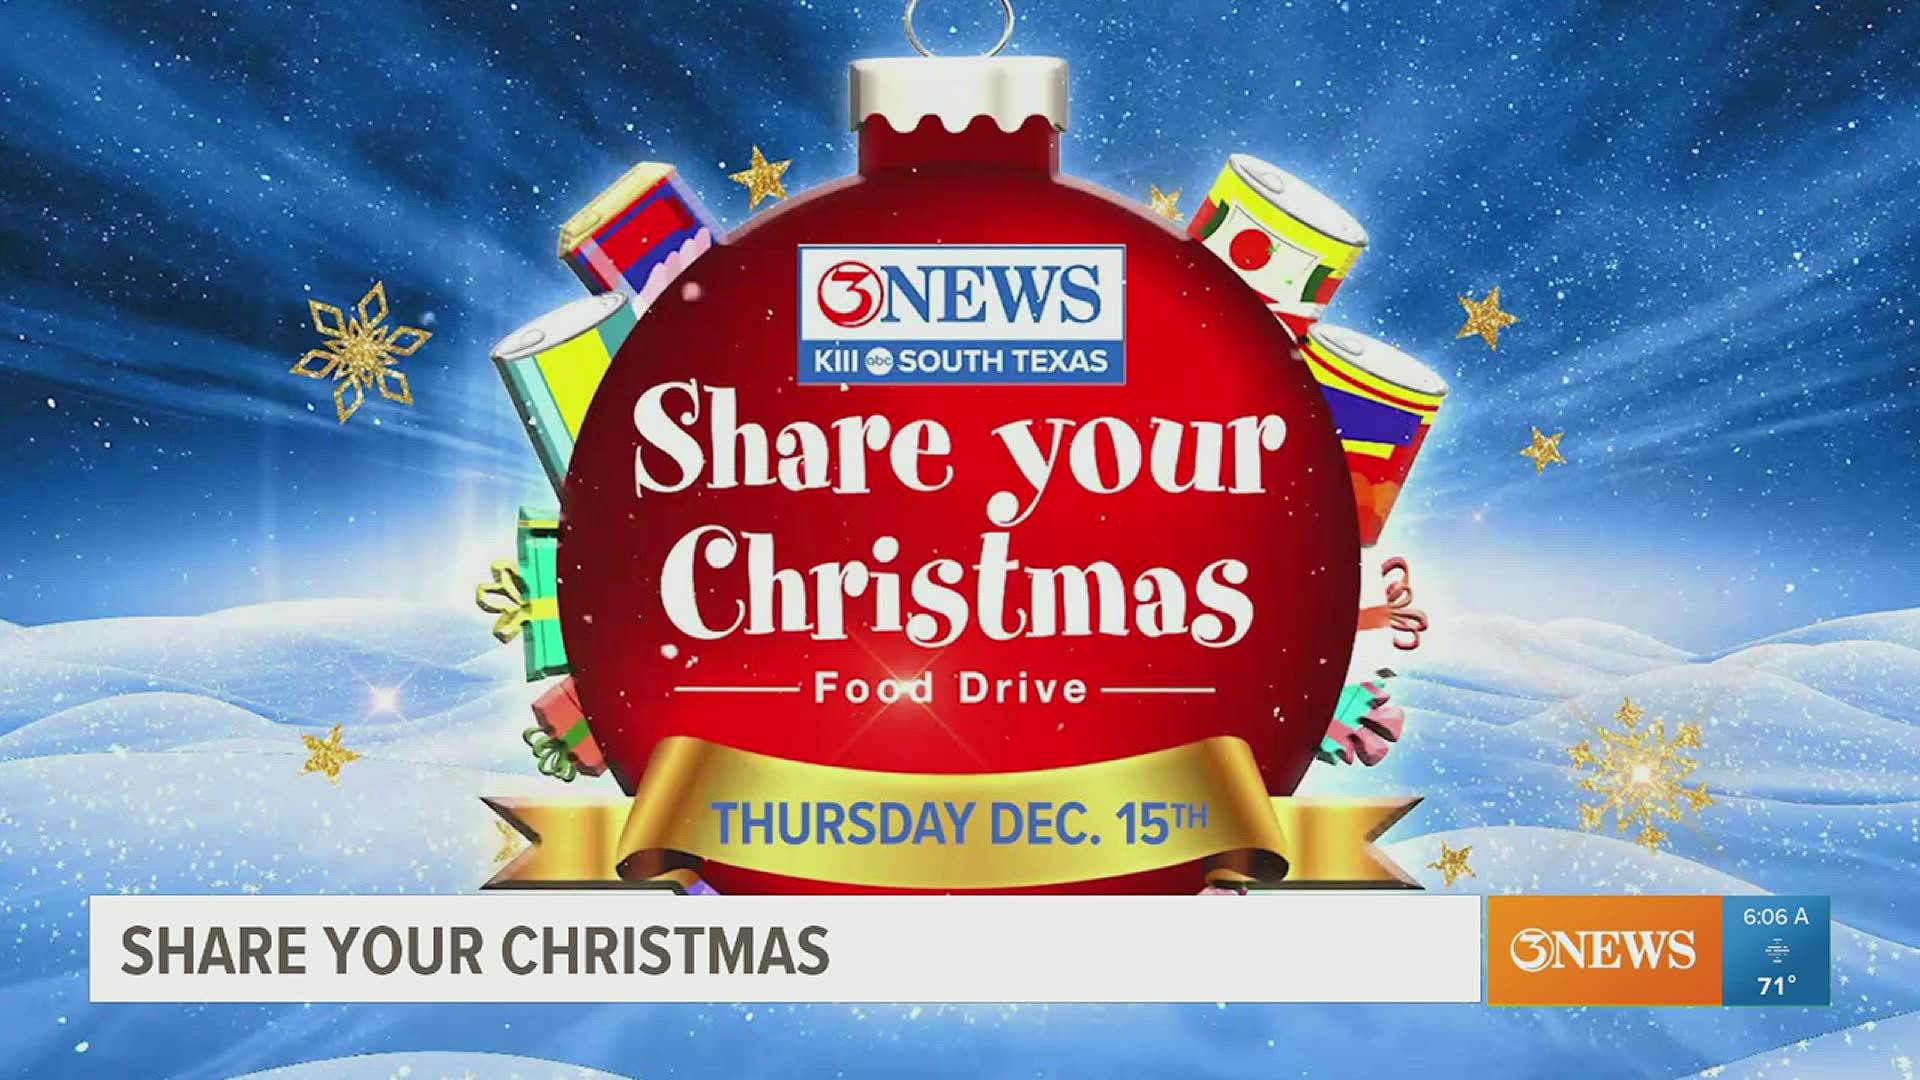 Mark your calendars! Share Your Christmas is on Tuesday, Dec. 15 this year.